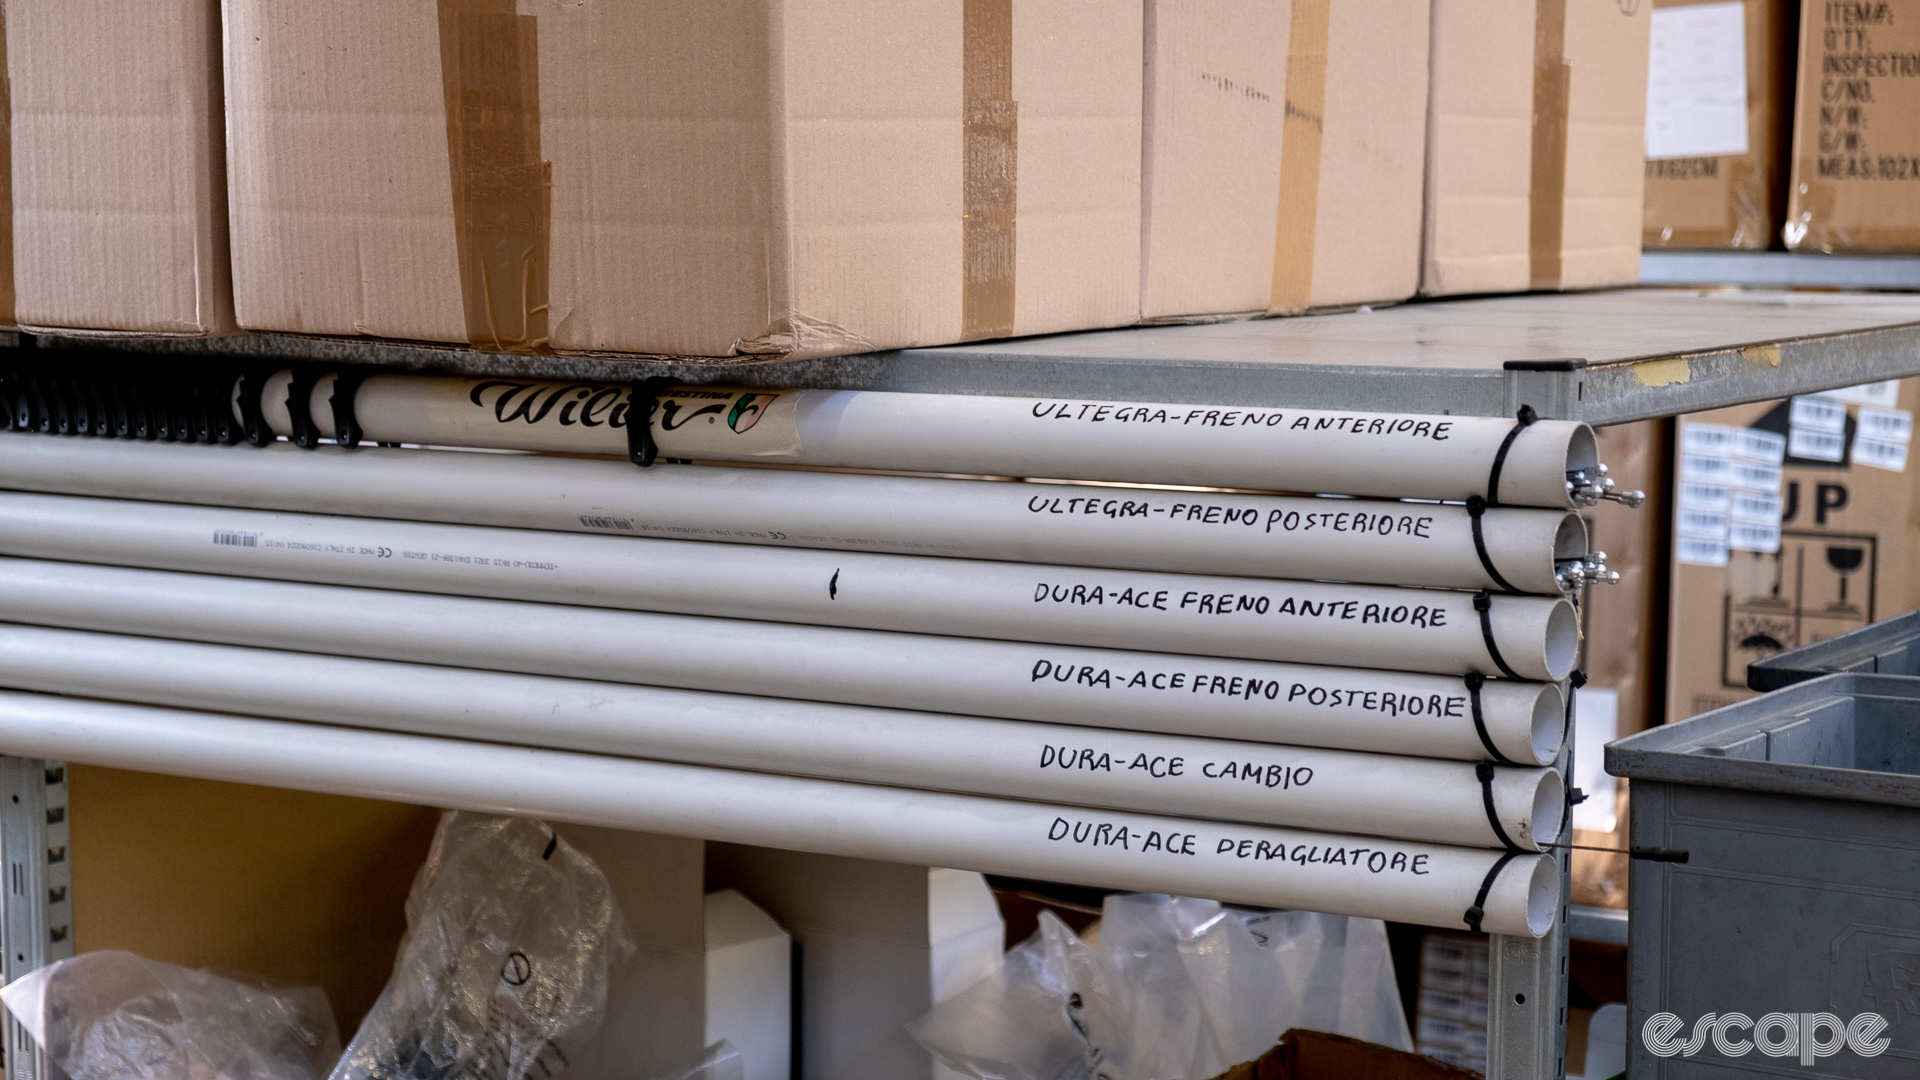 The image shows some long white pipes storing brake and mechanical shift cables with the Dura-Ace and Ultegra names written on some of the pipes.  